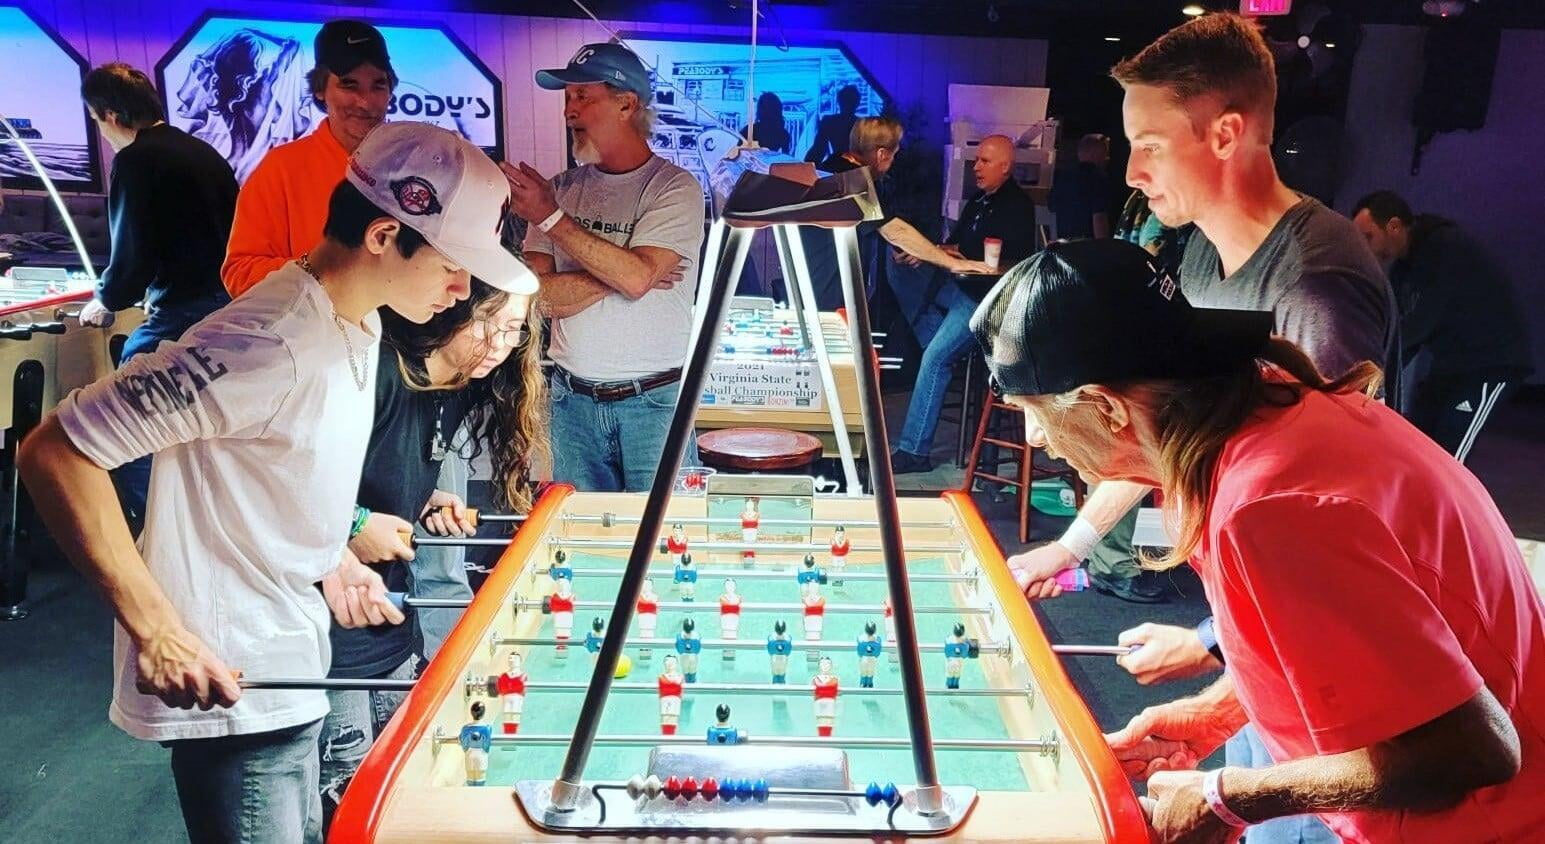 The 2022 Virginia State Foosball Championships